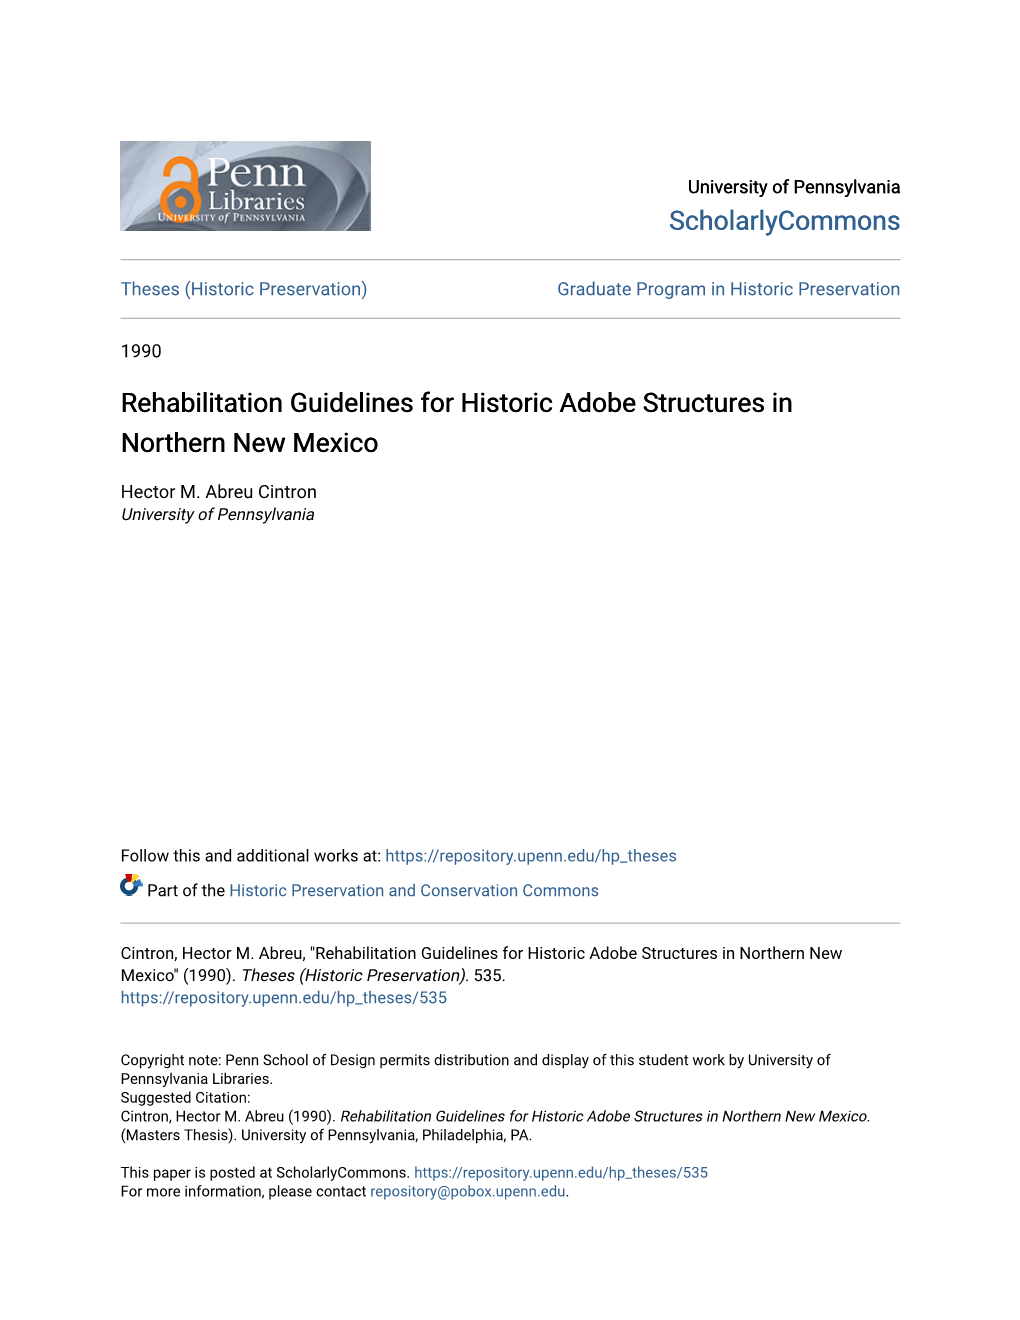 Rehabilitation Guidelines for Historic Adobe Structures in Northern New Mexico